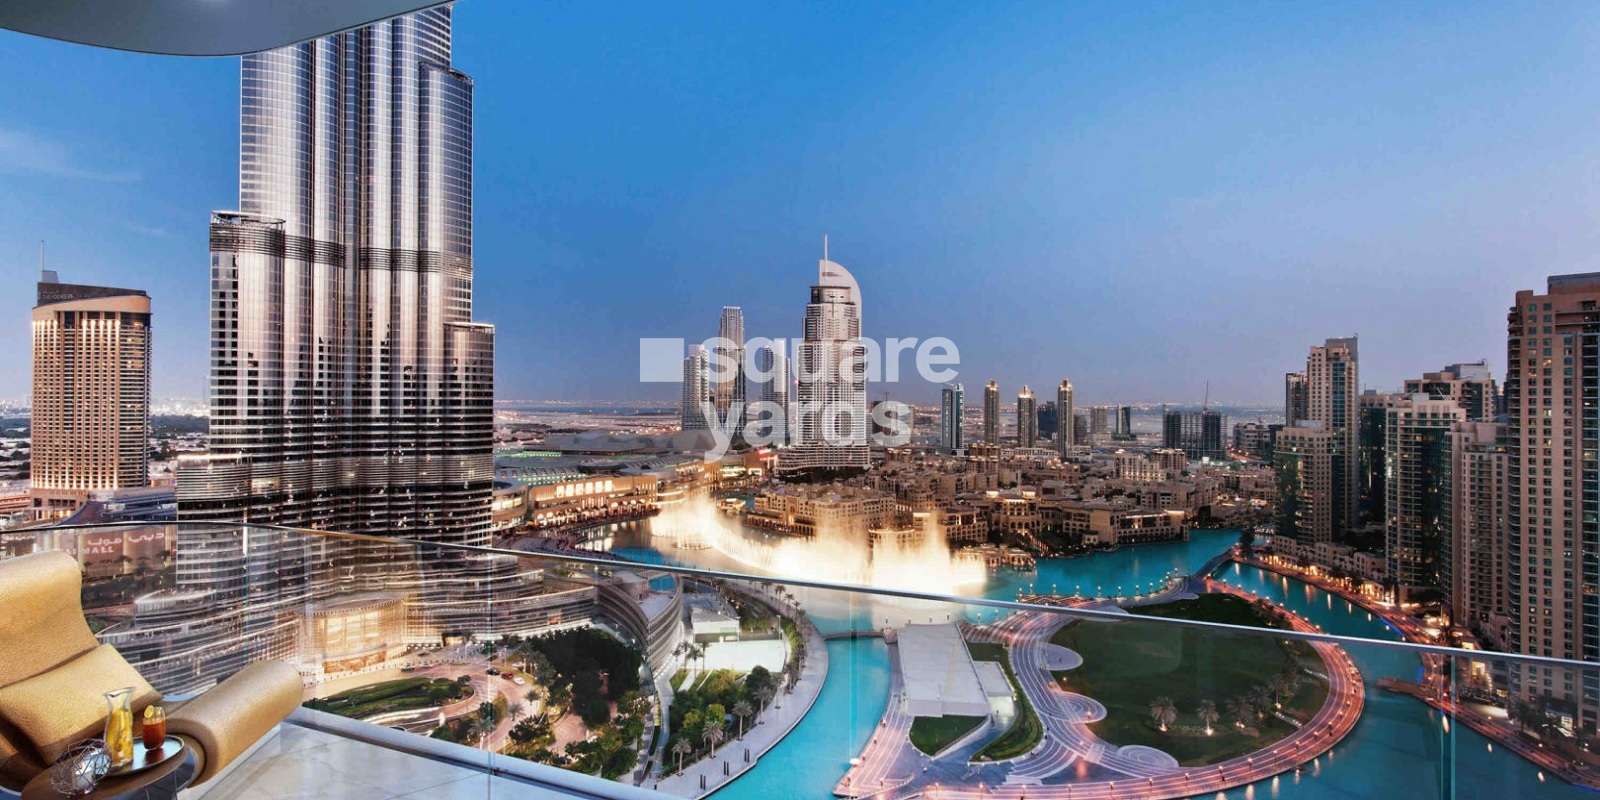 emaar il primo project amenities features1